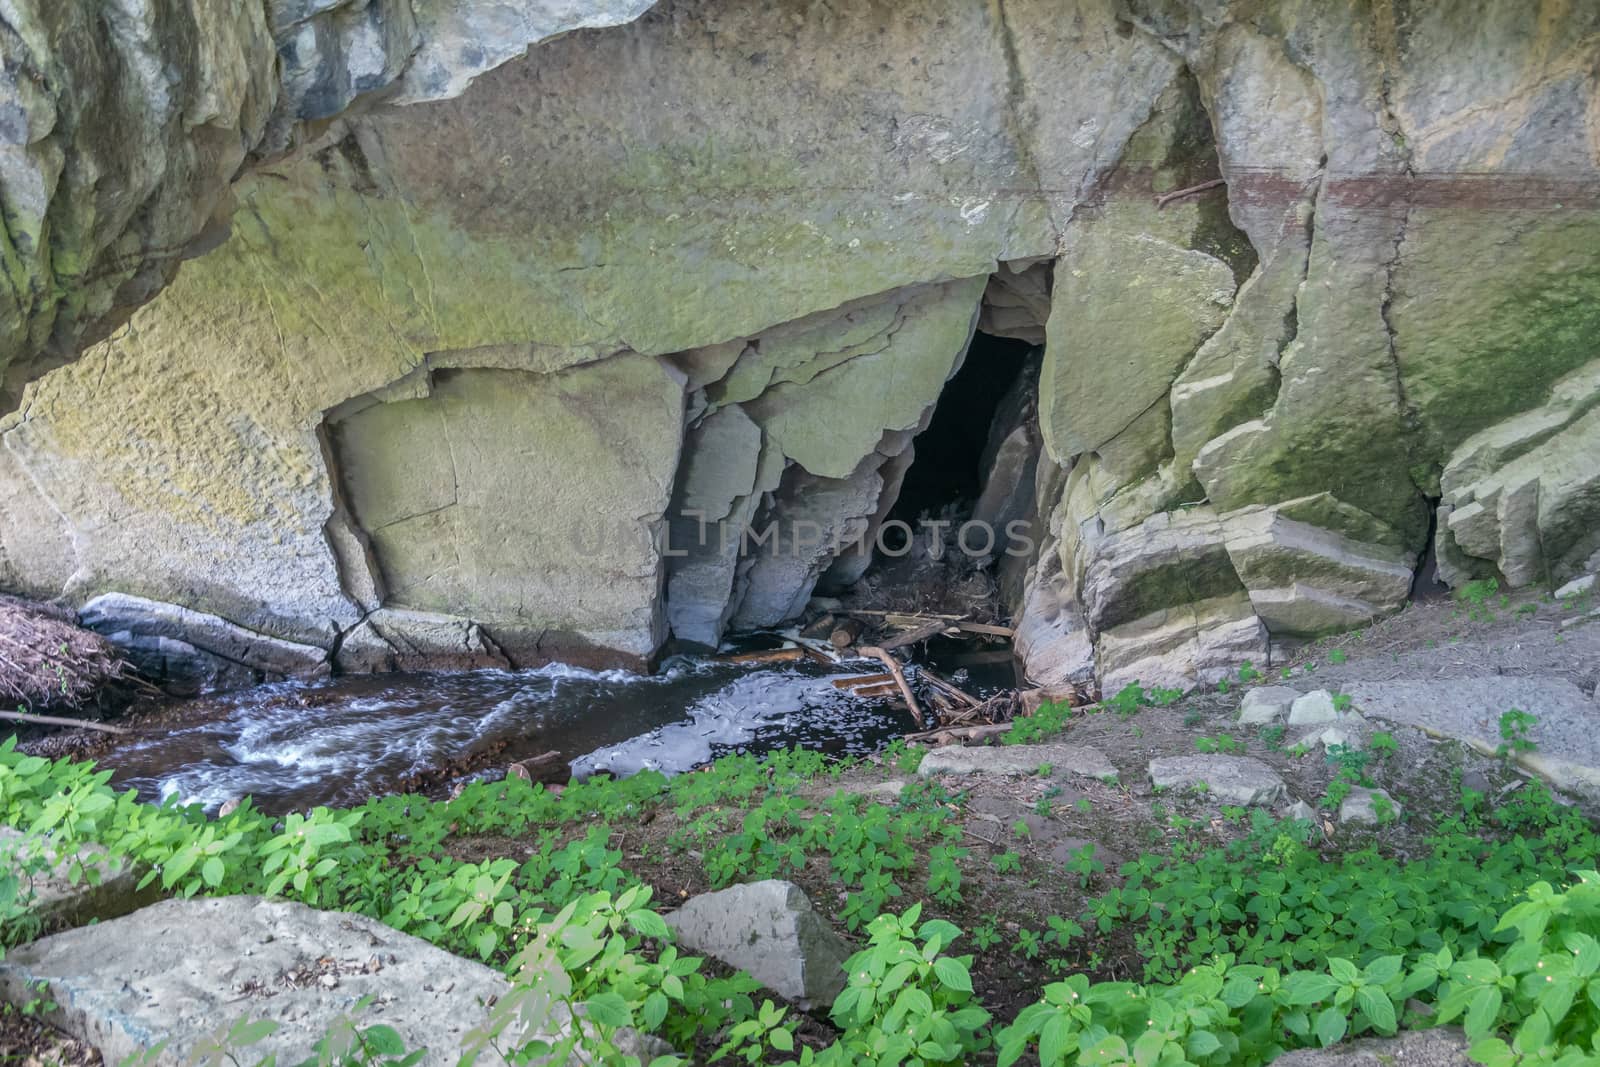 Where Lesse River enters cave system in Han-sur-lesse, Belgium. by Claudine